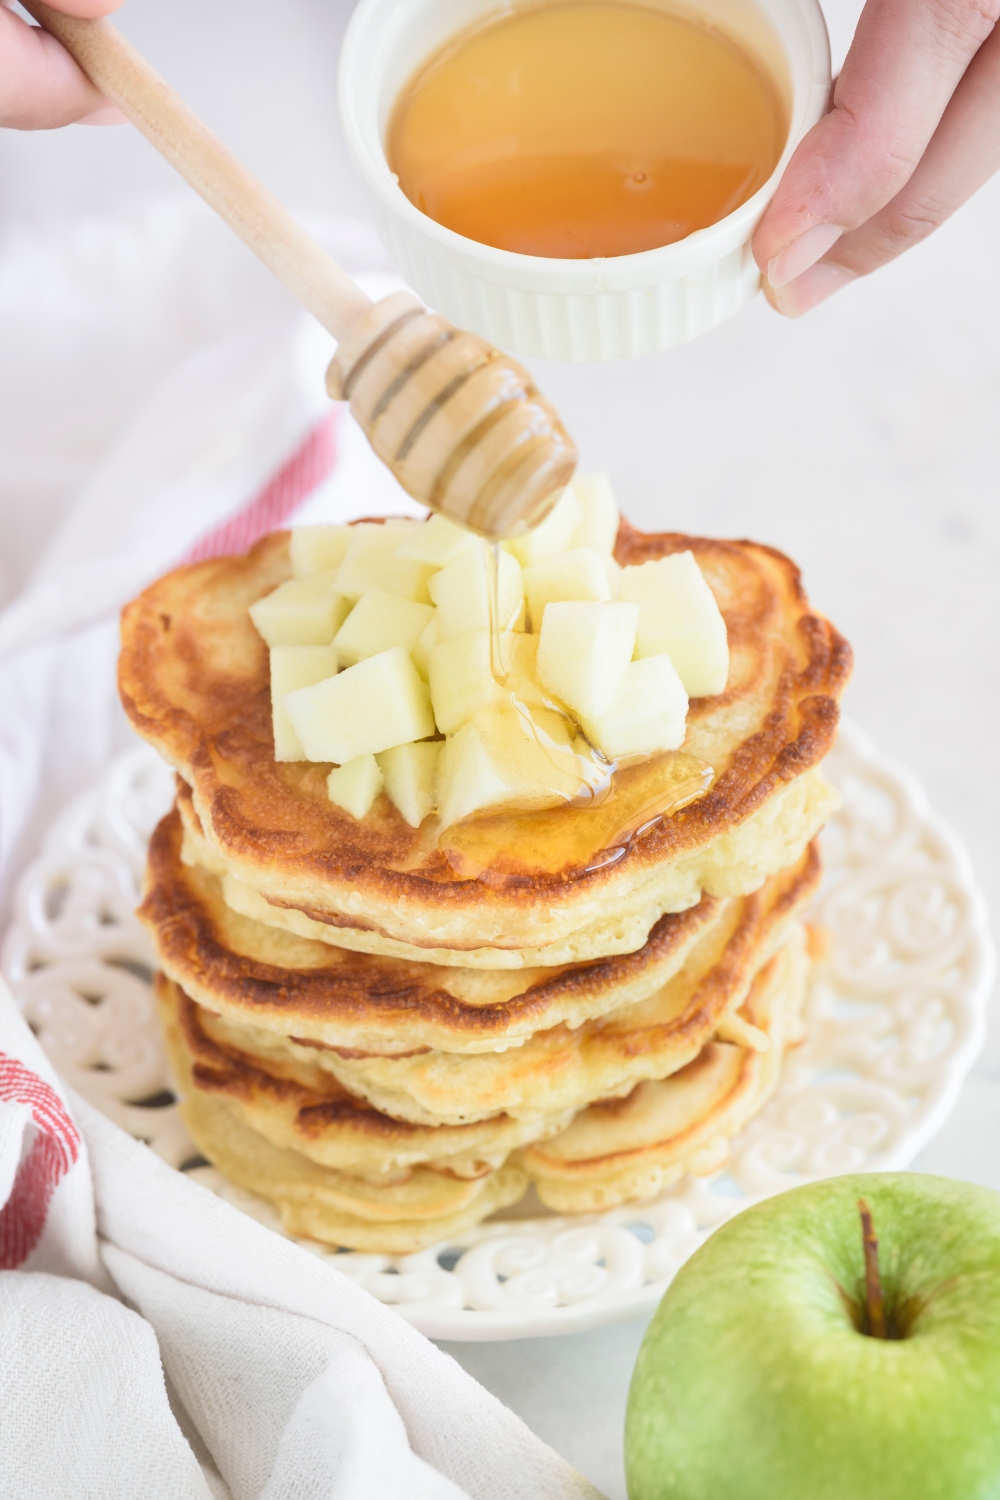 A tall stack of pancakes topped with diced apples and honey being drizzled on top of the pancakes.